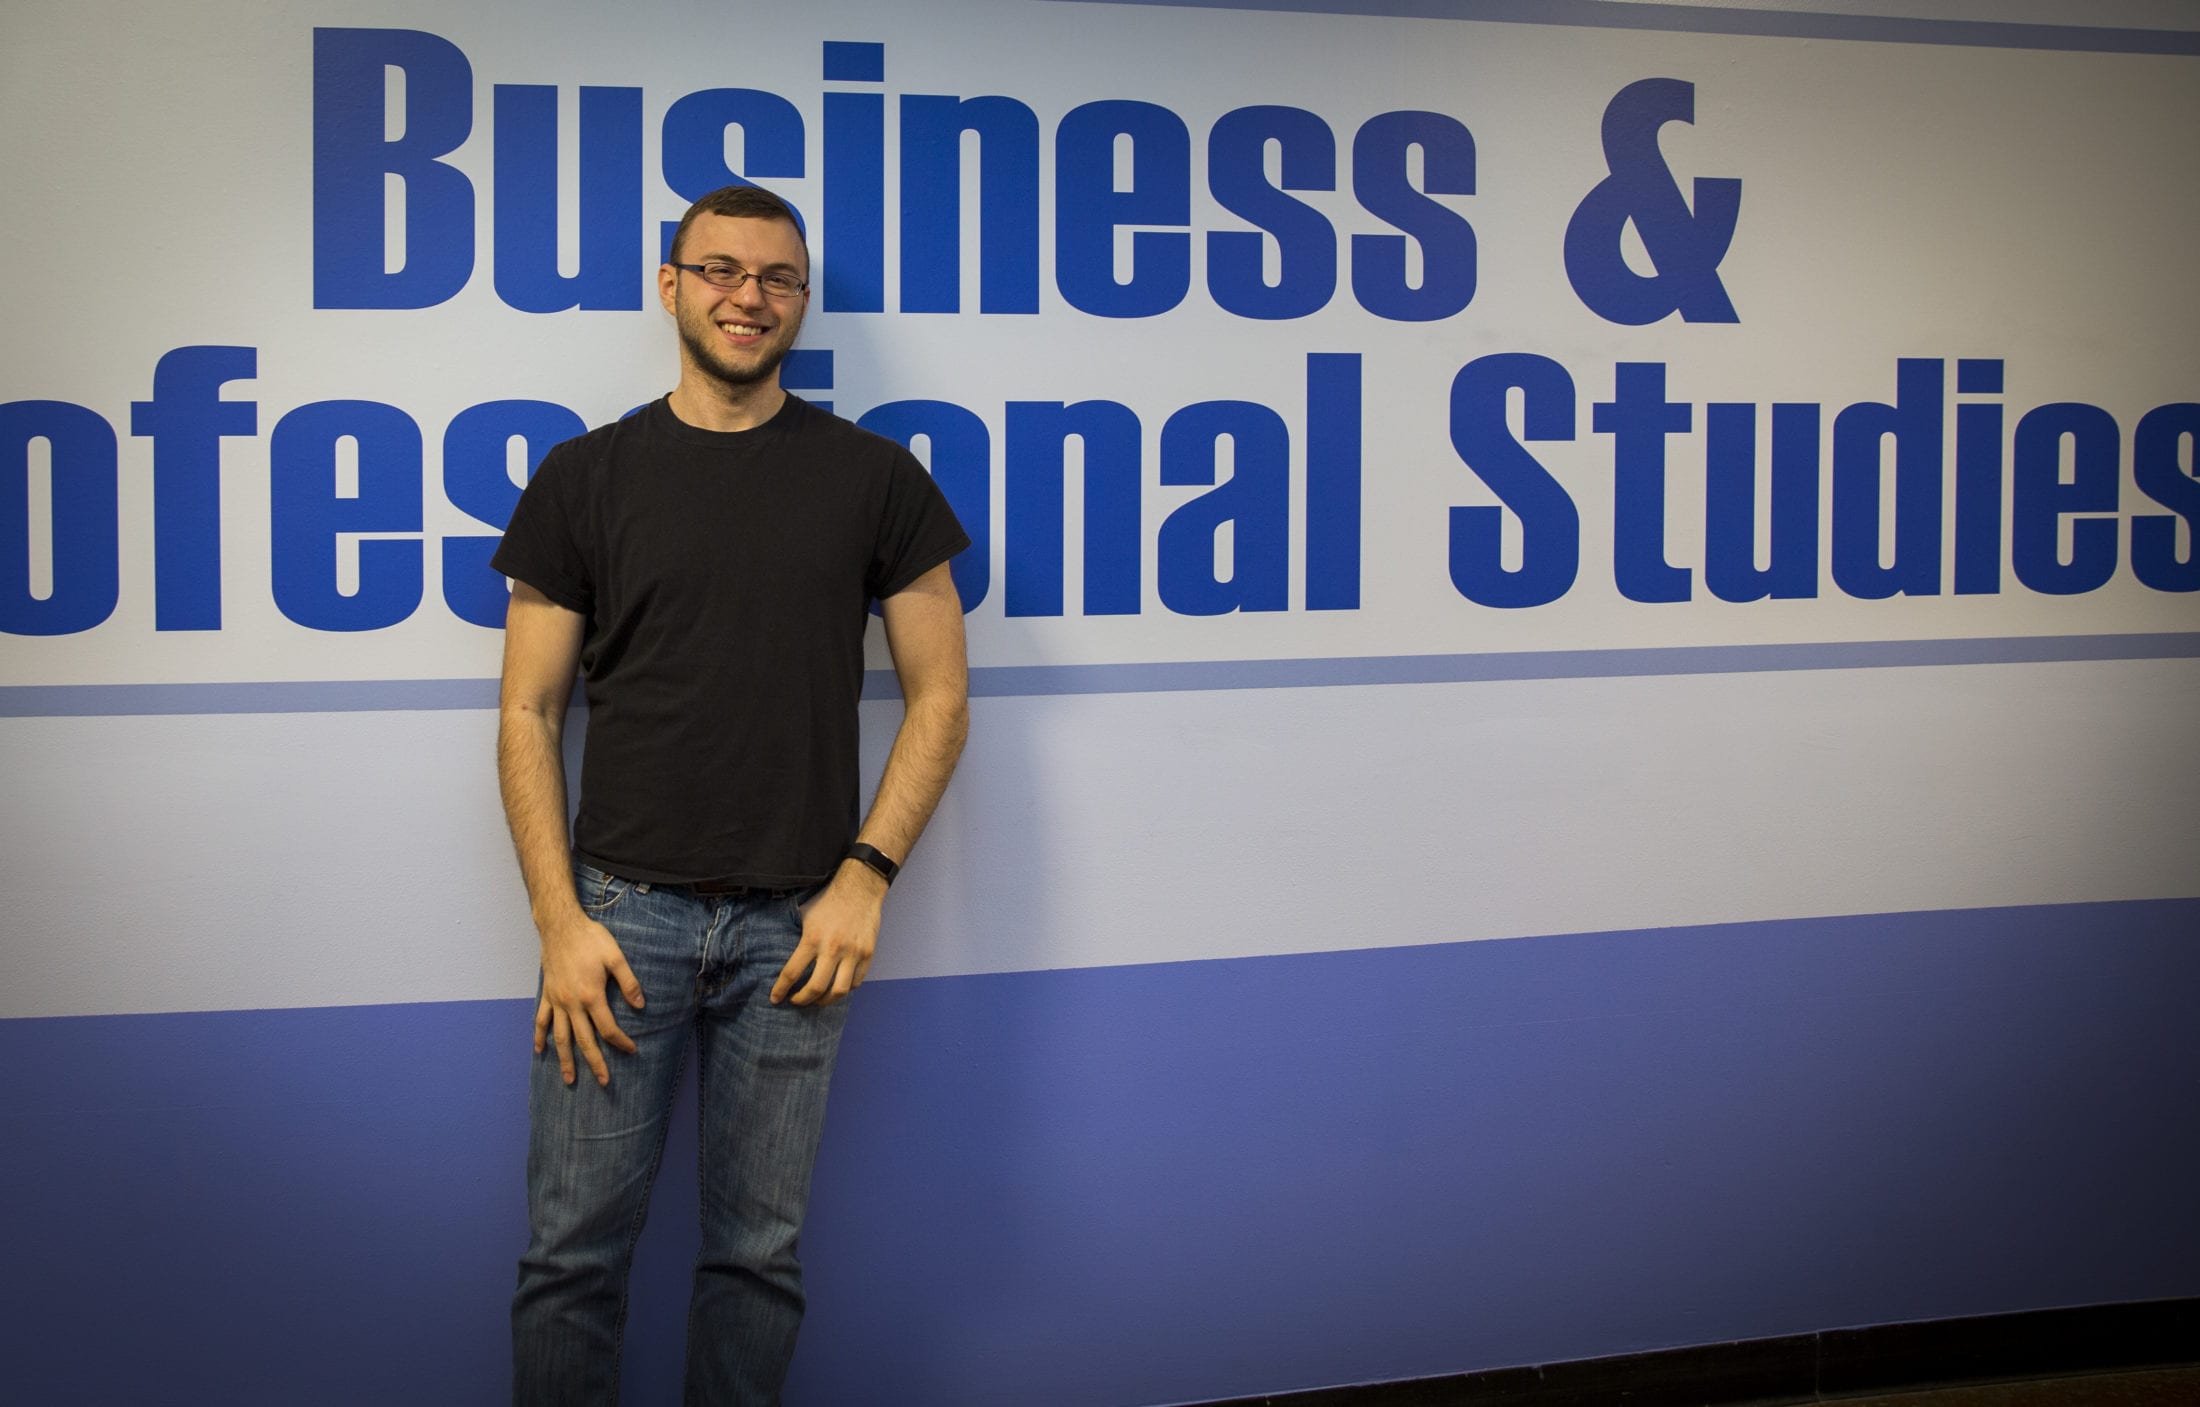 Aiming for the top: How SUNY Broome inspired Branden to reach his potential